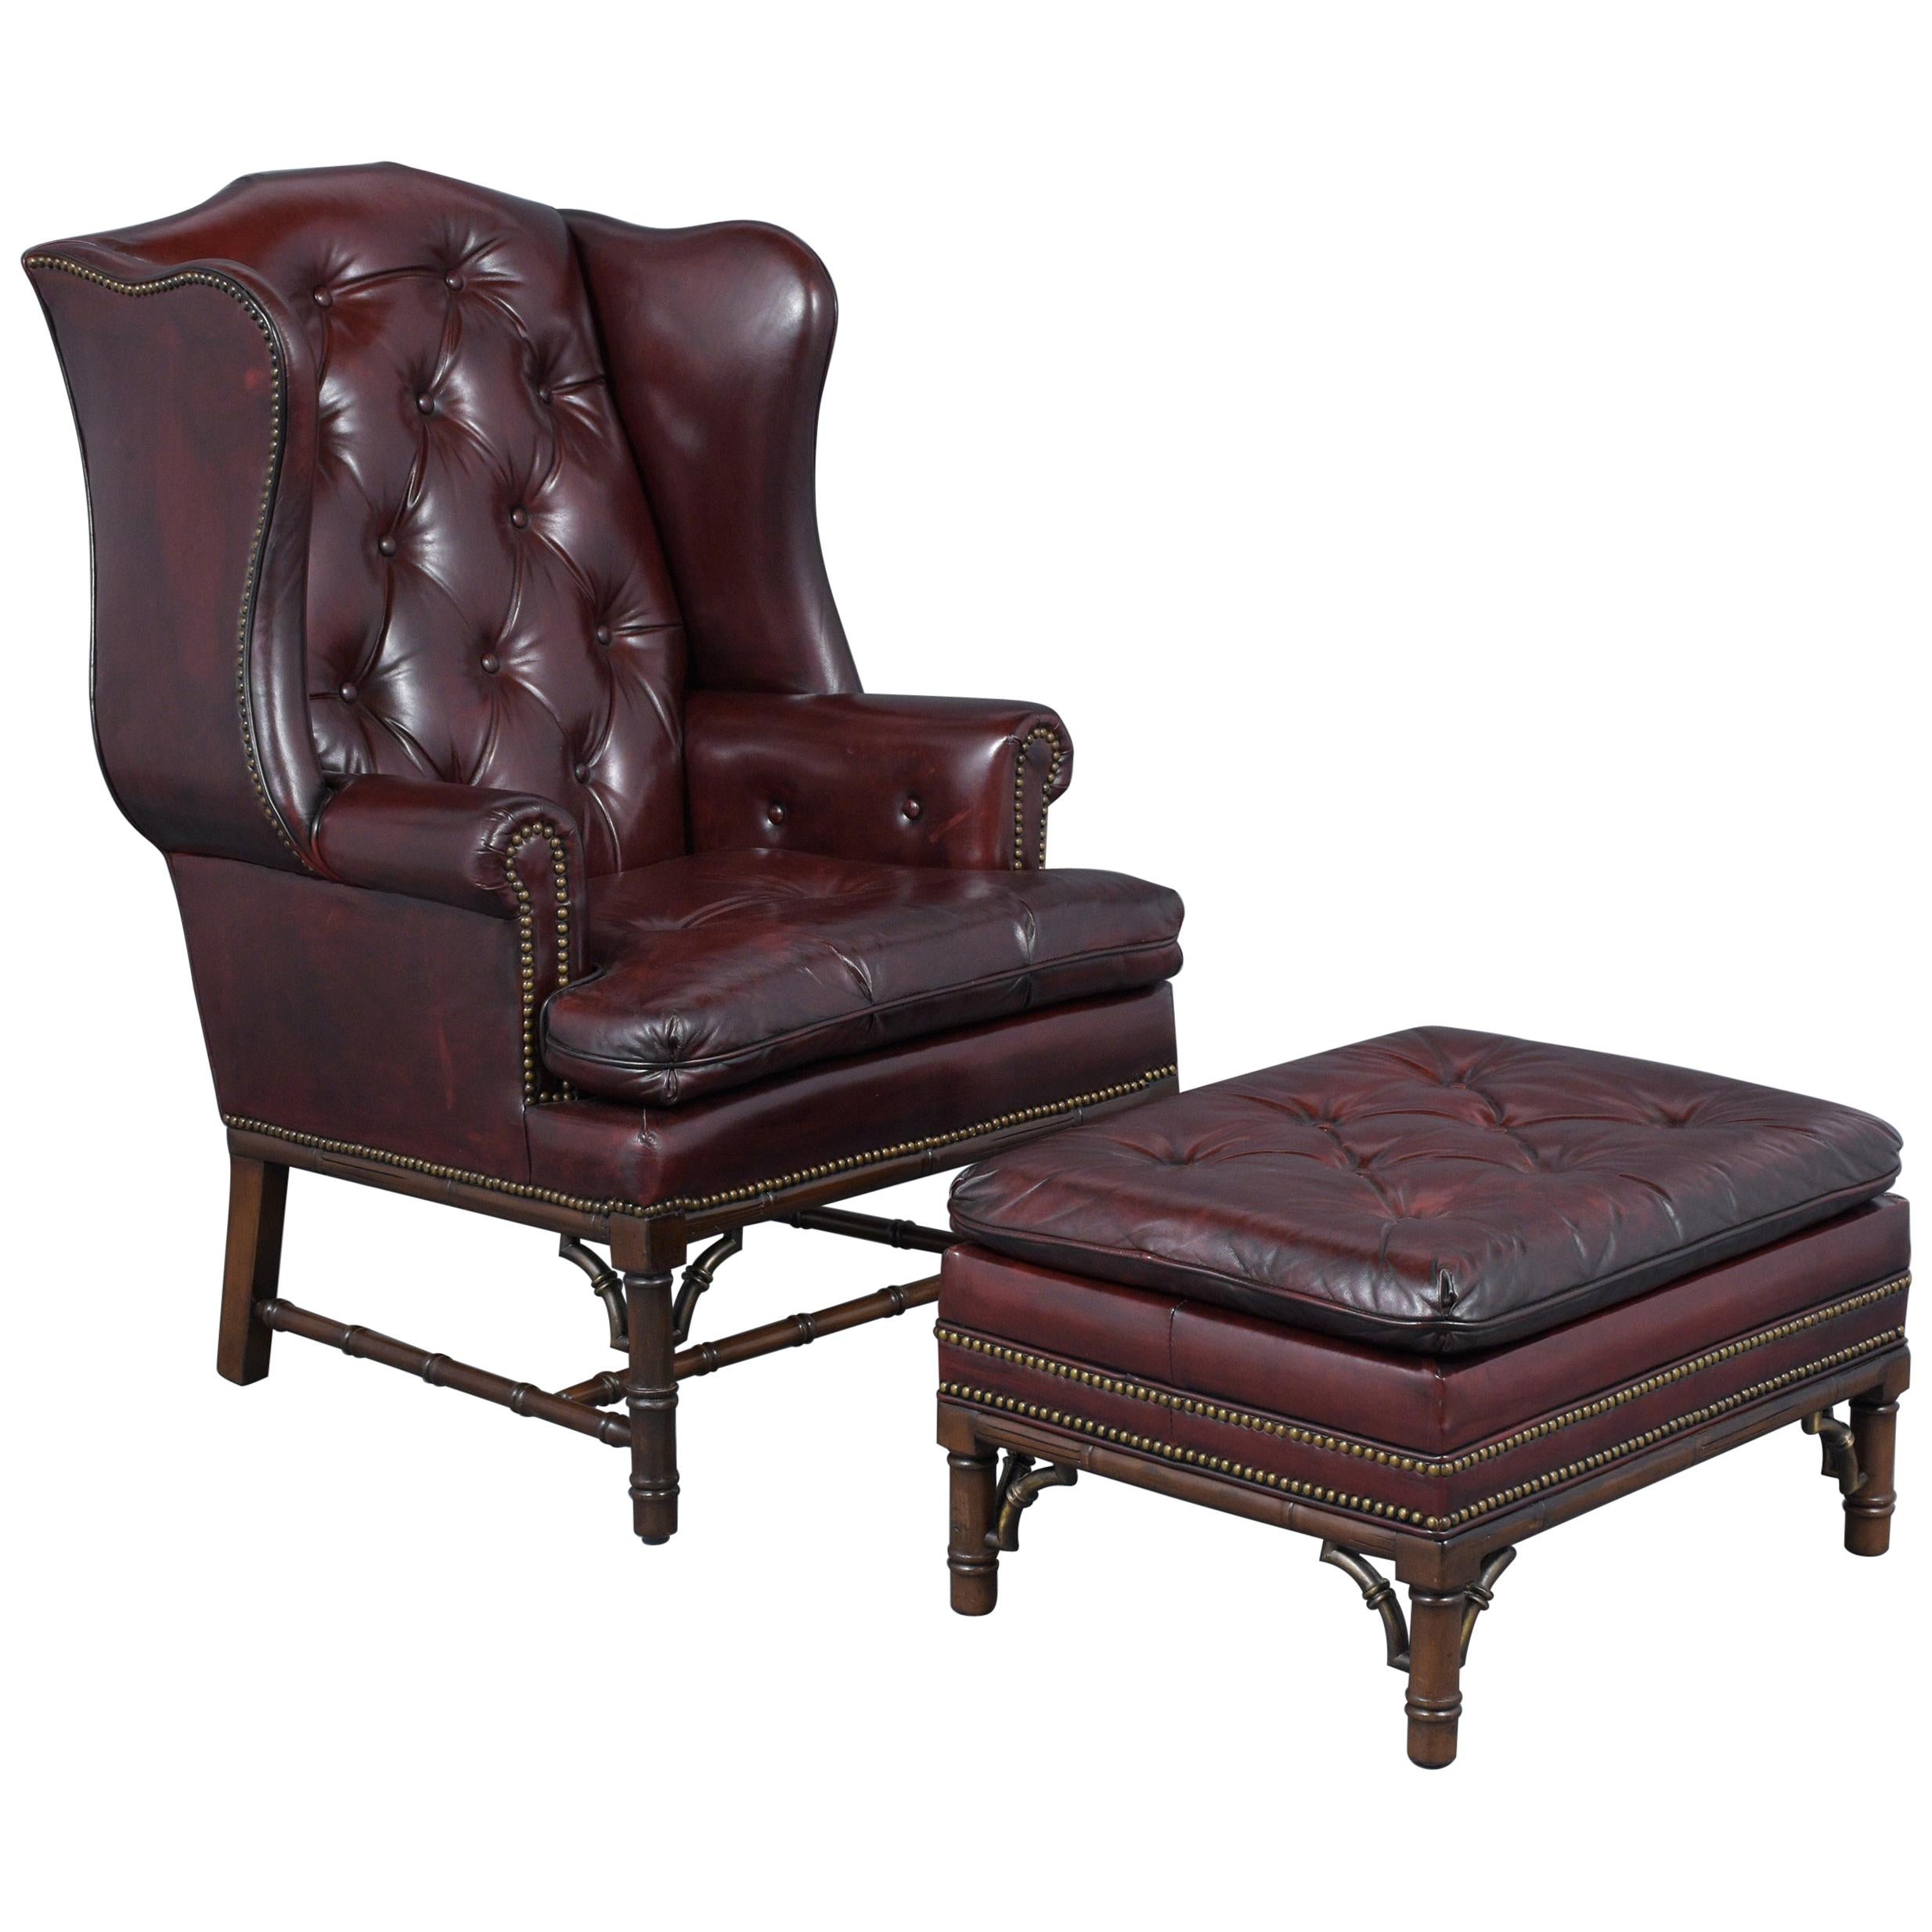 Vintage Leather Wingback Chair with Ottoman